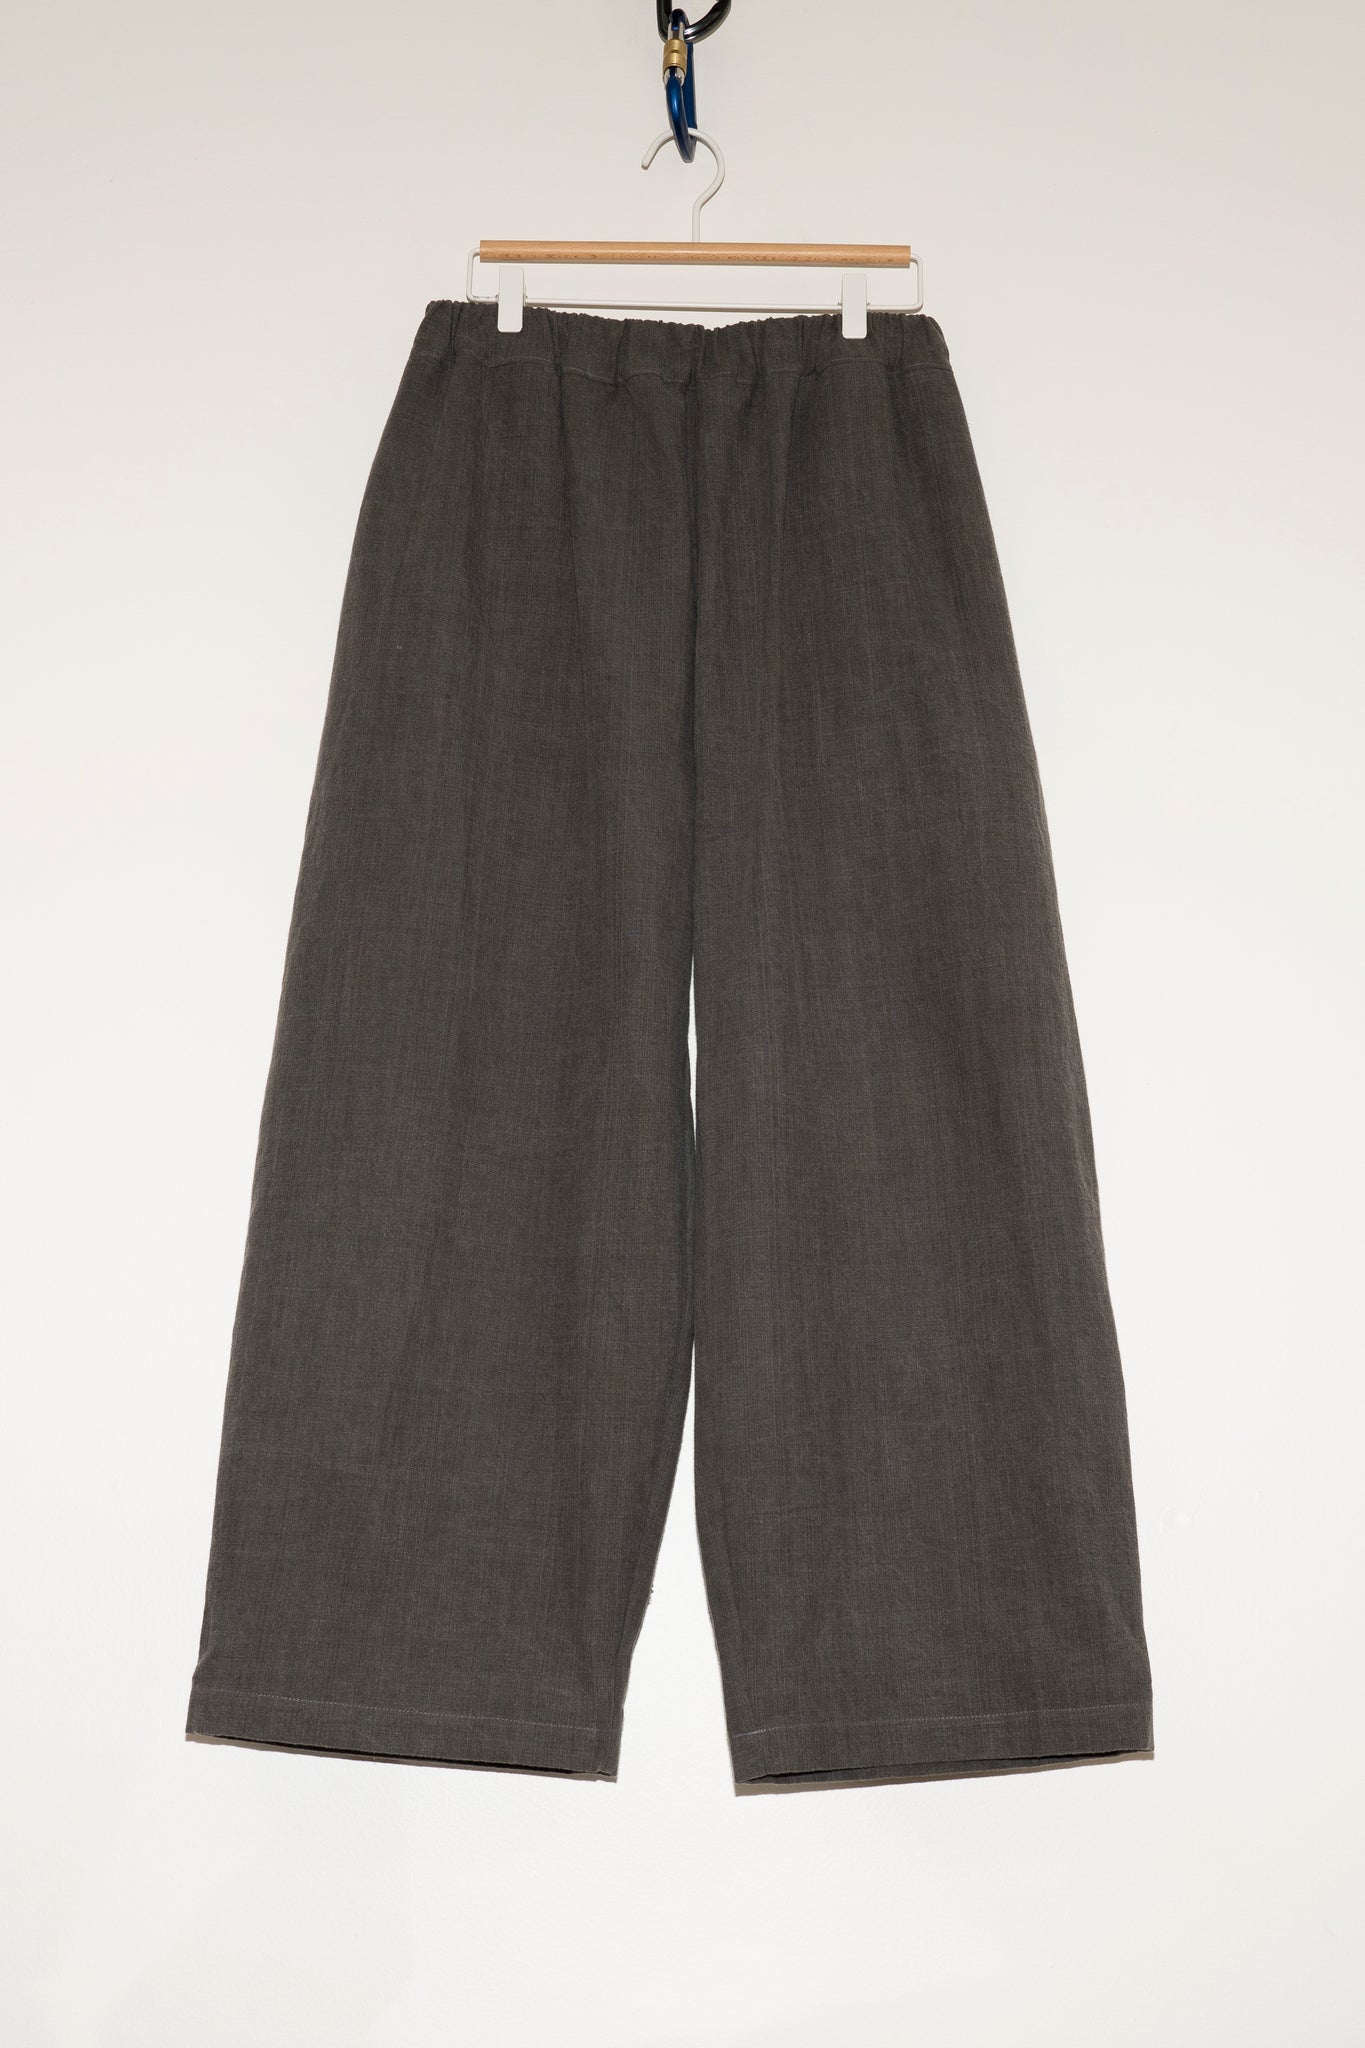 WILLIAM FREDERICK - STUDIO PANT IN CHARCOAL SUMI INK